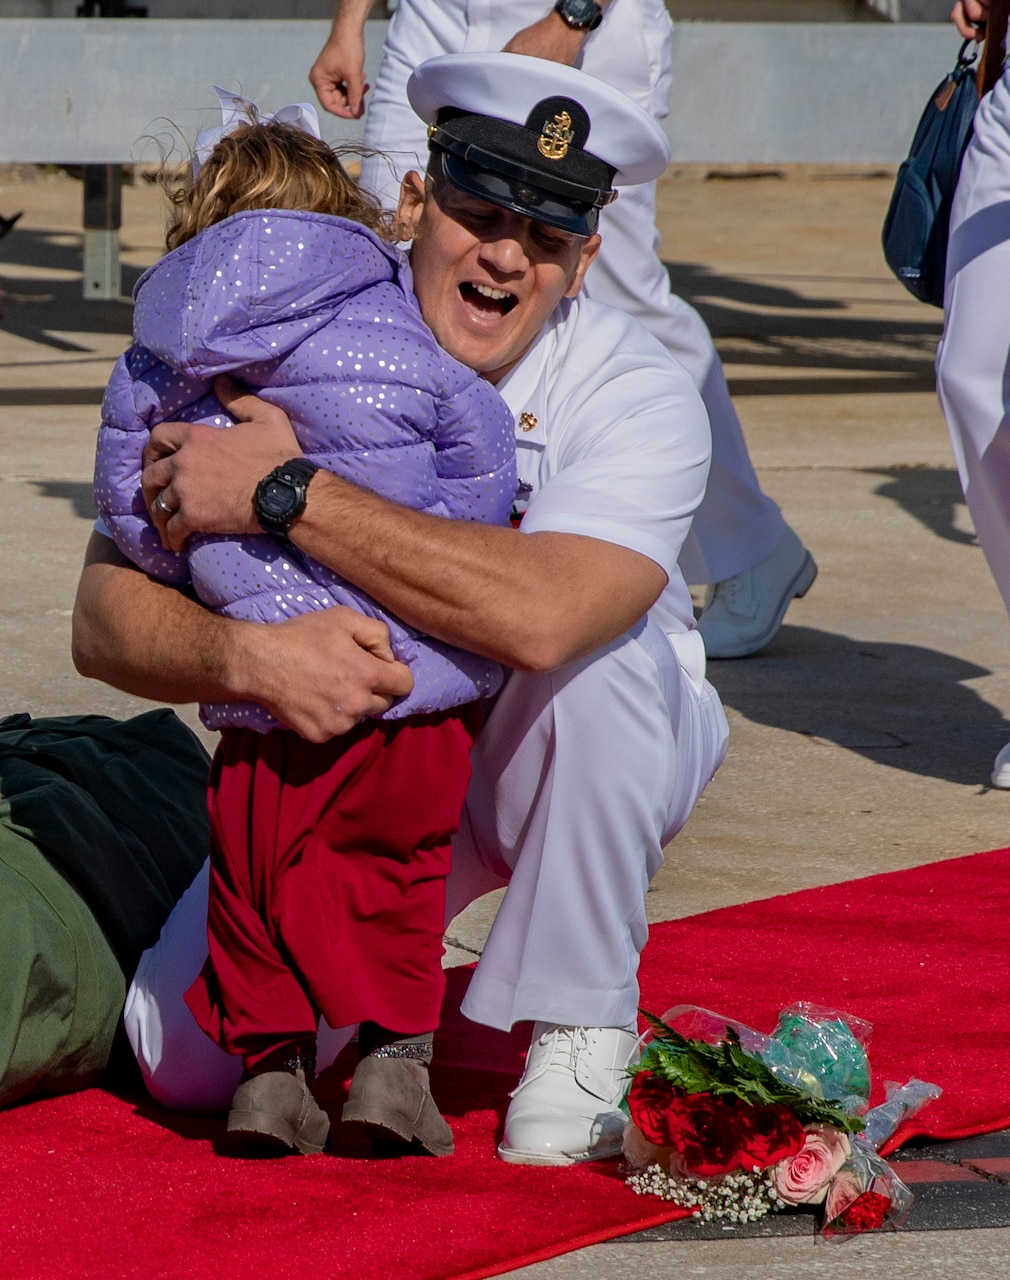 A chief petty officer, assigned to the Arleigh Burke-class guided-missile destroyer USS The Sullivans (DDG 68), greets his family after returning from a seven-month world deployment with the United Kingdom's HMS Queen Elizabeth (R08) Carrier Strike Group, Nov. 24, 2021.